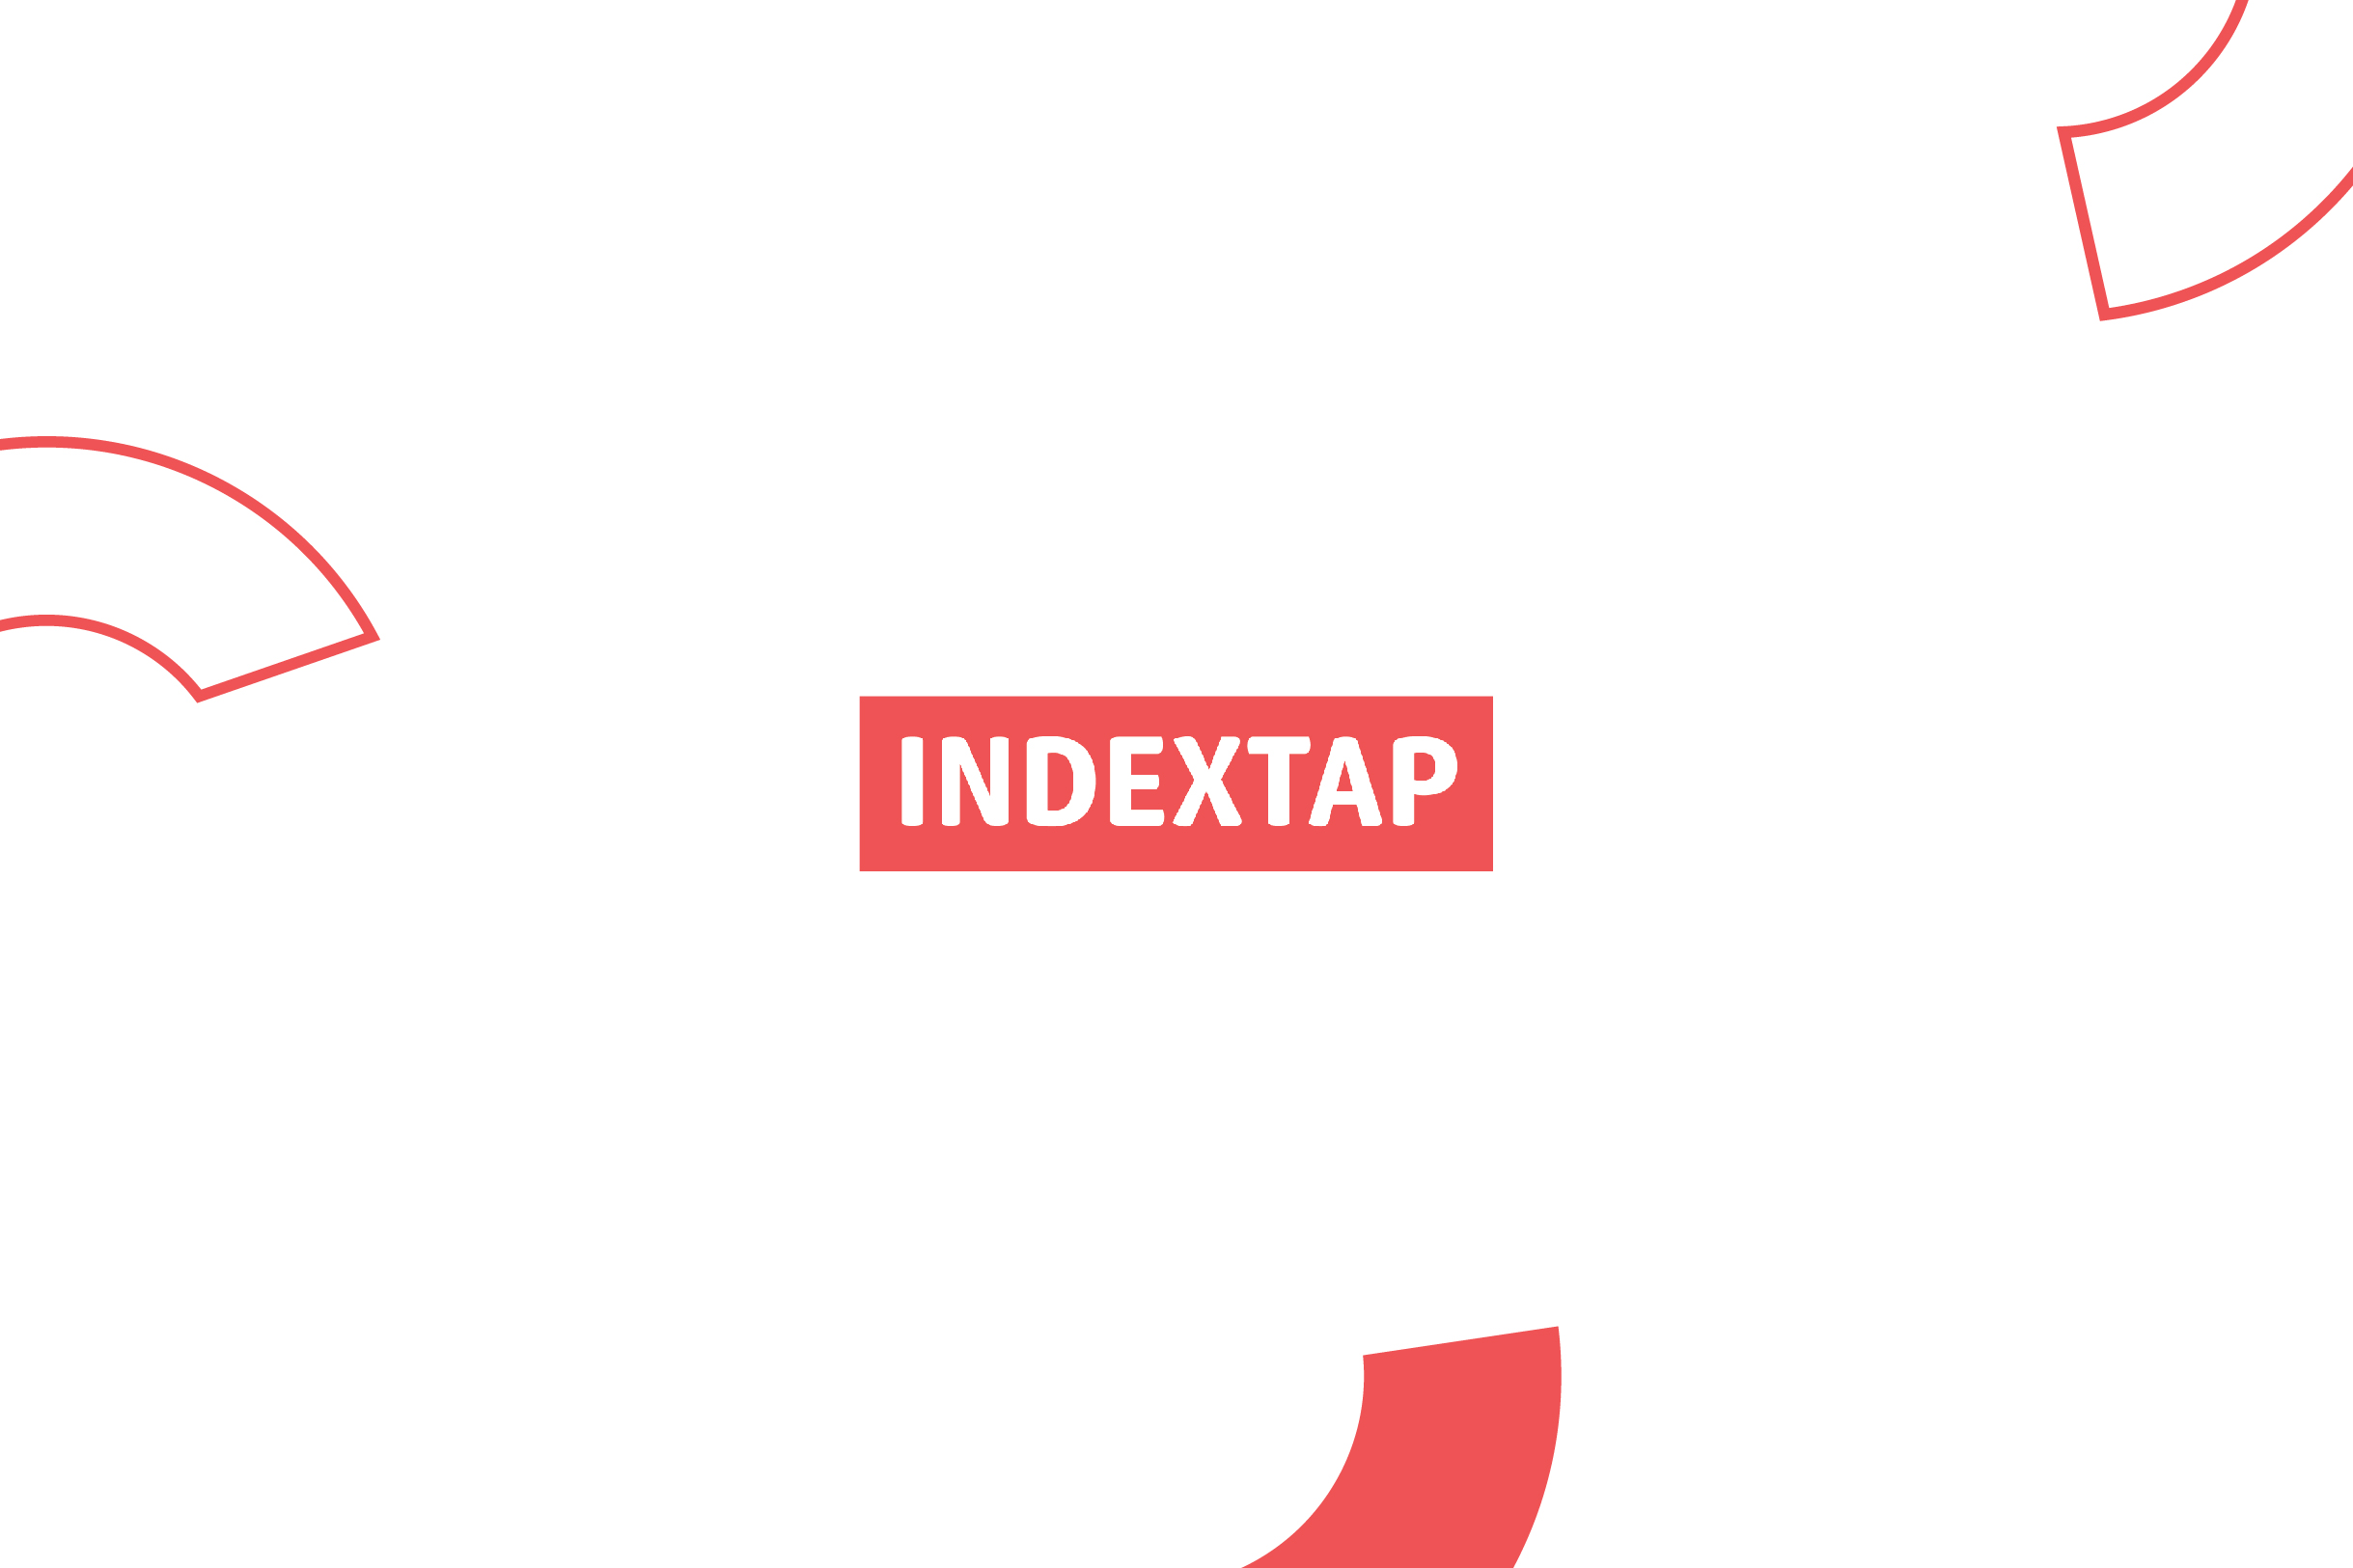 Benefits of Indextap to the Broker or Channel Partner